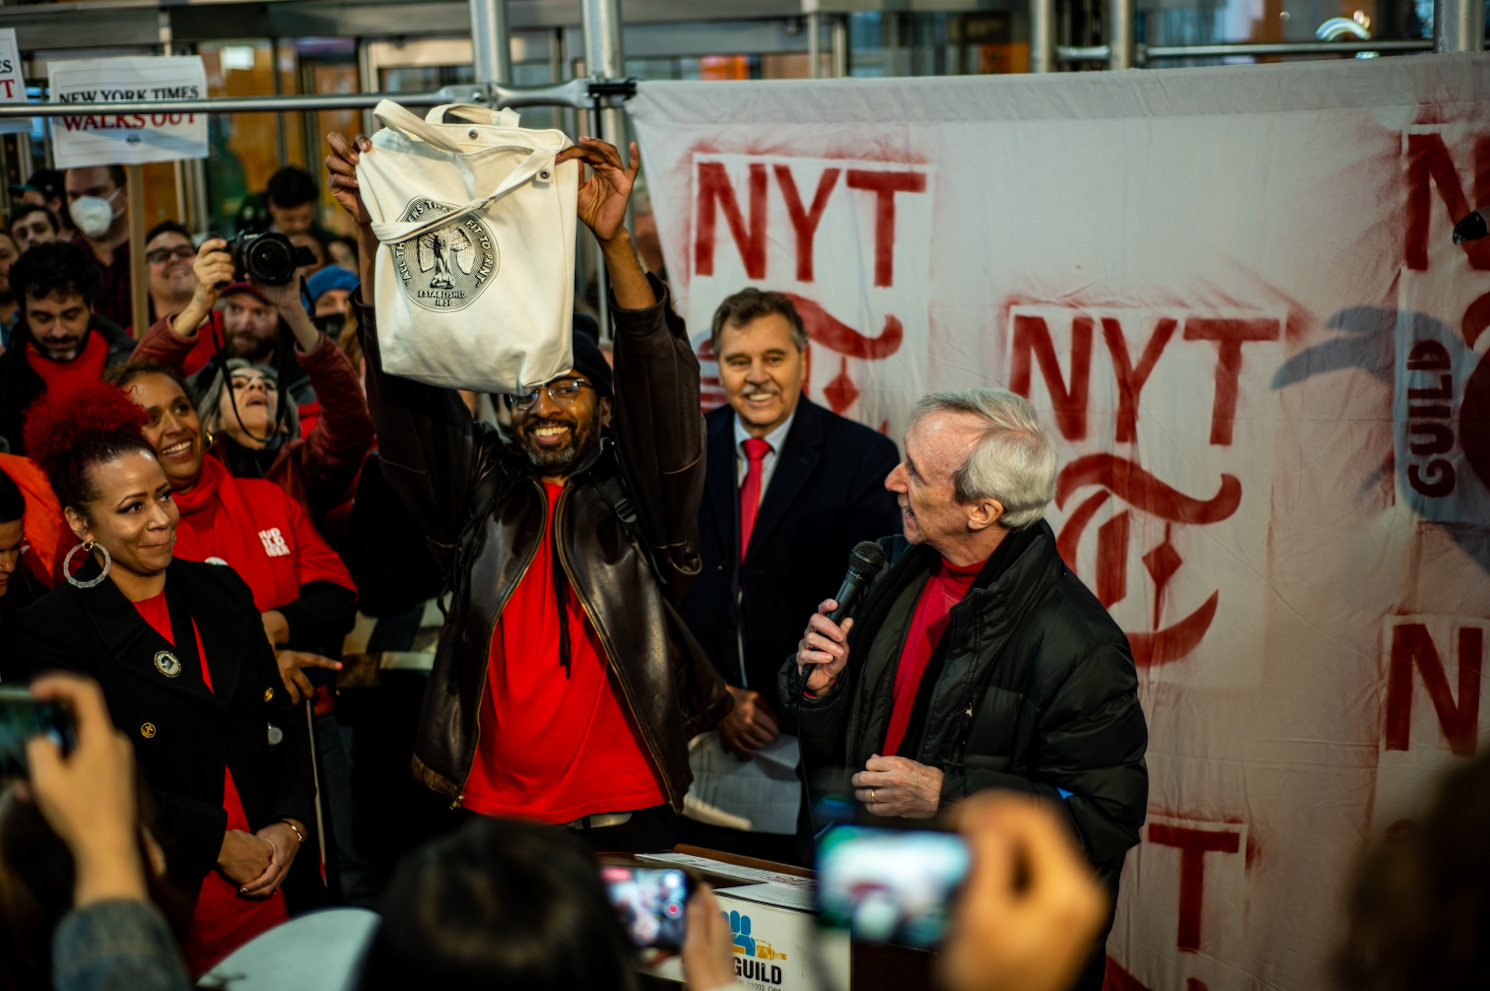 A speaker standing at a podium and a man next to him holding a New York Times tote bag. The New York Times logo and a crowd are behind them.